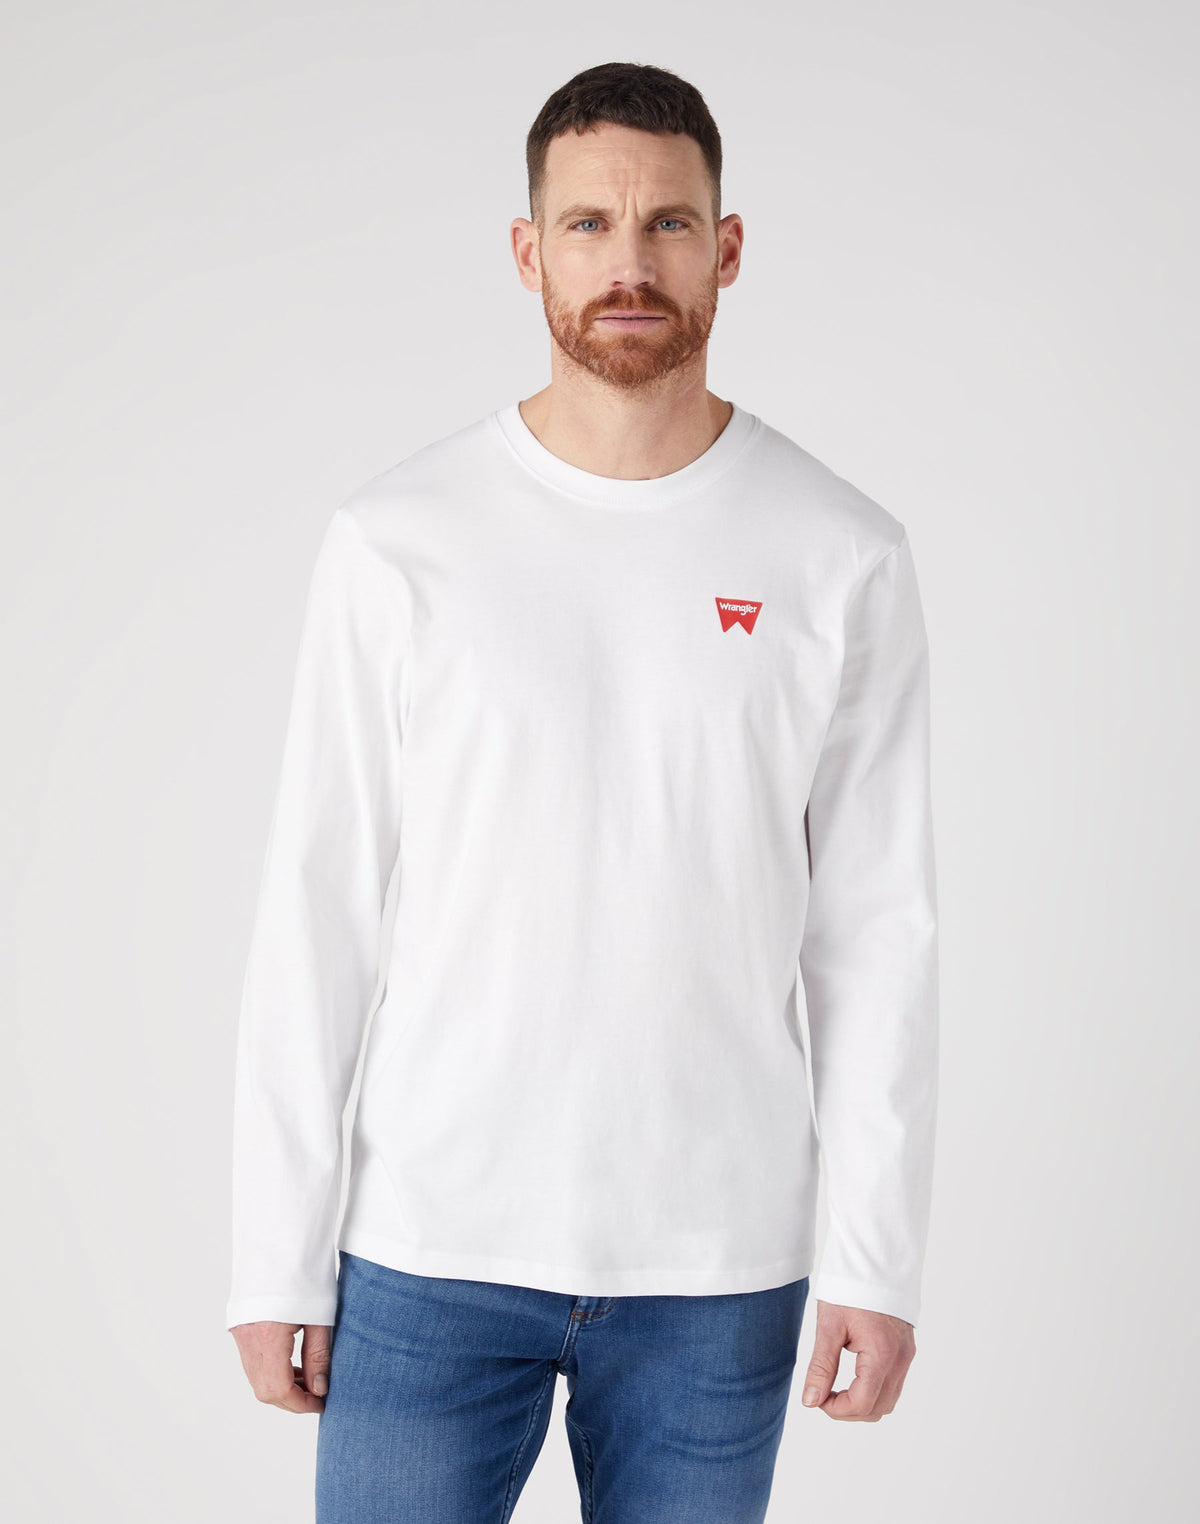 LS Sign Off Tee in White